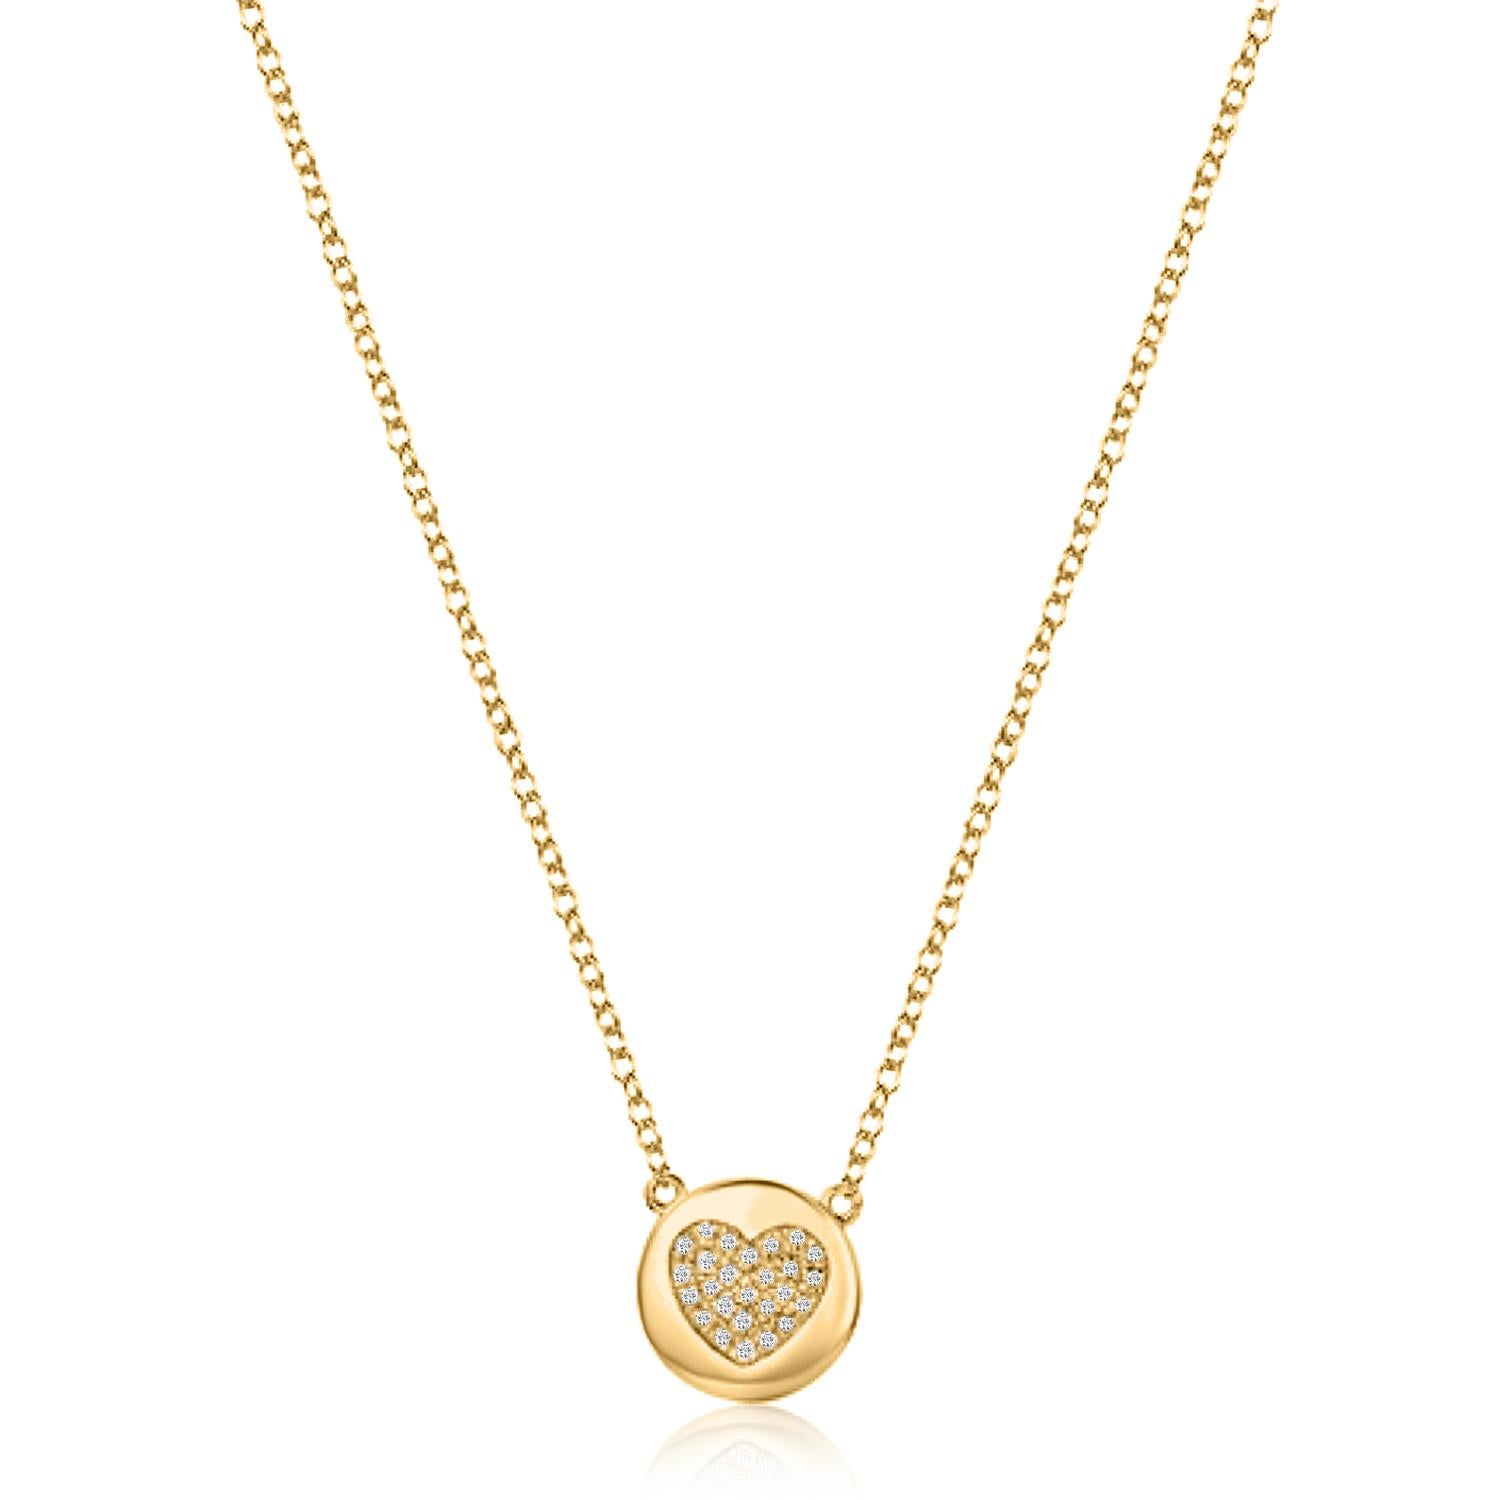 14k Gold Disc Heart Diamond Necklace

Necklace Information
Diamond Type : Natural Diamond
Metal : 14k Gold
Metal Color : Rose Gold, Yellow Gold, White Gold
Total Carat Weight : 0.14 ttcw
Diamond colour-clarity : G/H Color VS/Si1 Clarity
 

JEWELRY